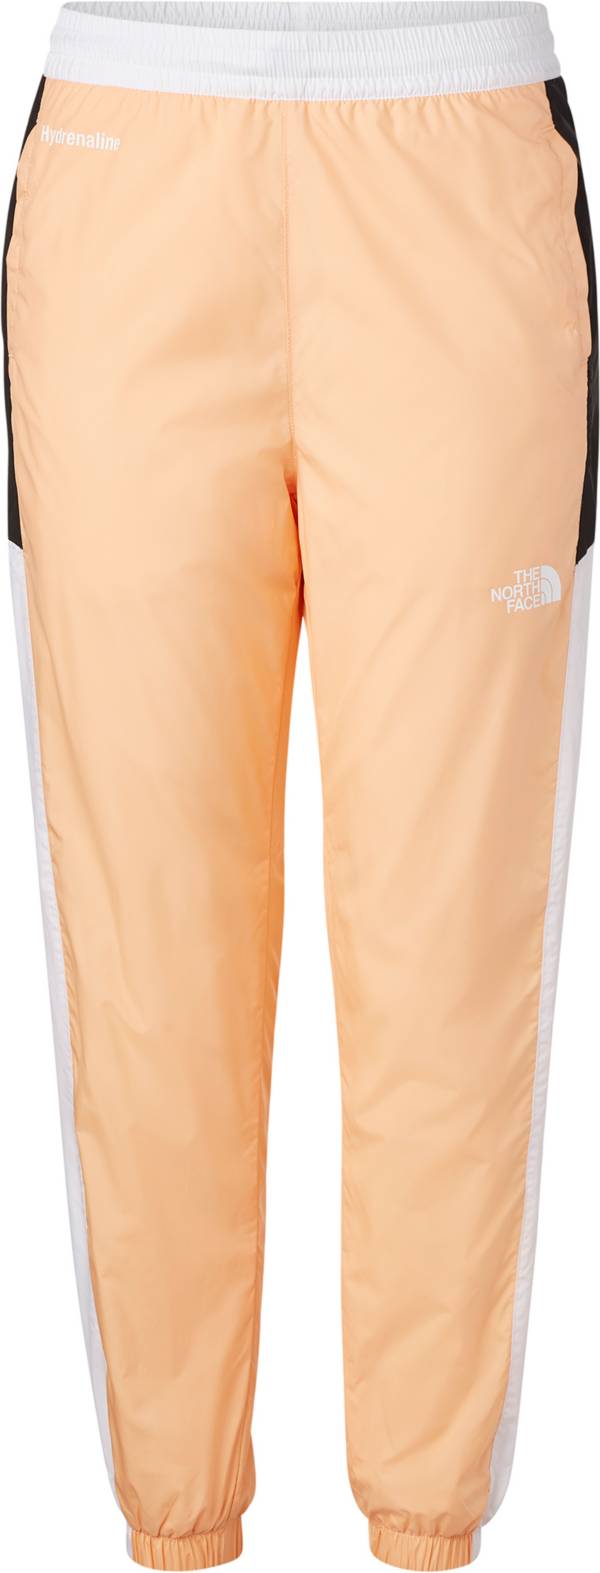 The North Face Women's Hydrenaline 2000 Pants product image